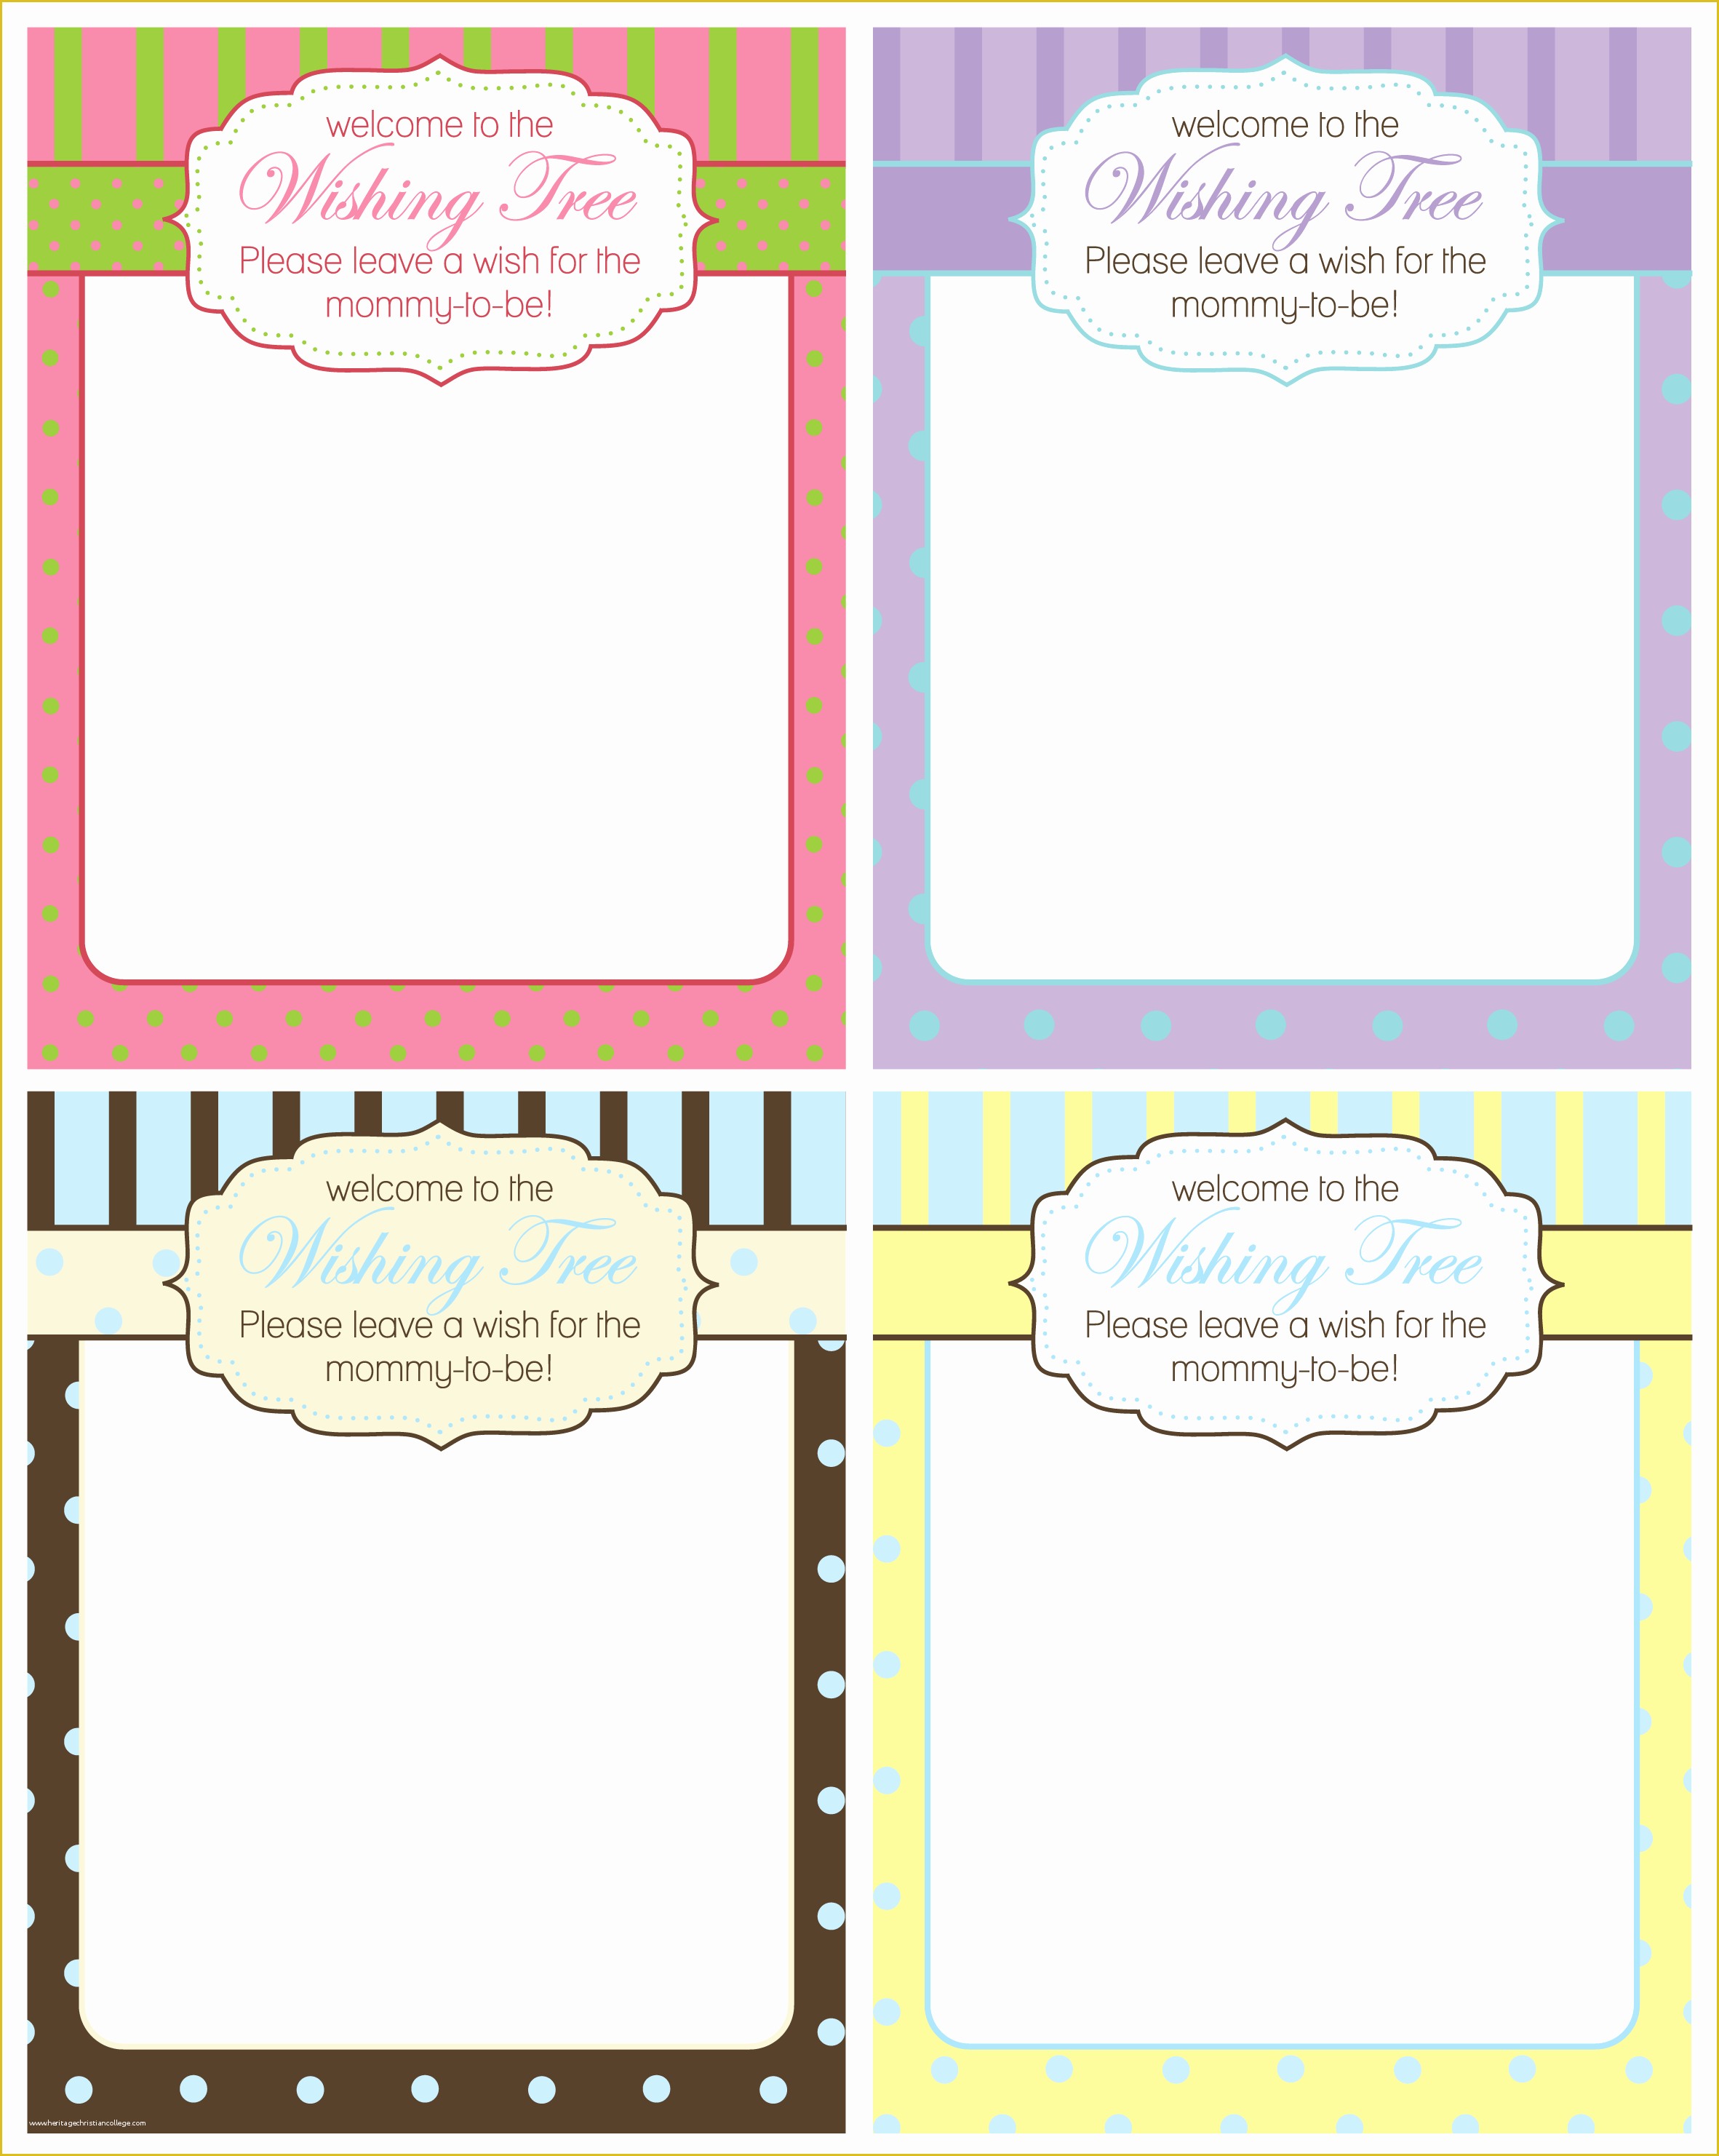 Free Printable Baby Shower Cards Templates Of Free Baby Shower Wishing Tree Cards From A Party Studio